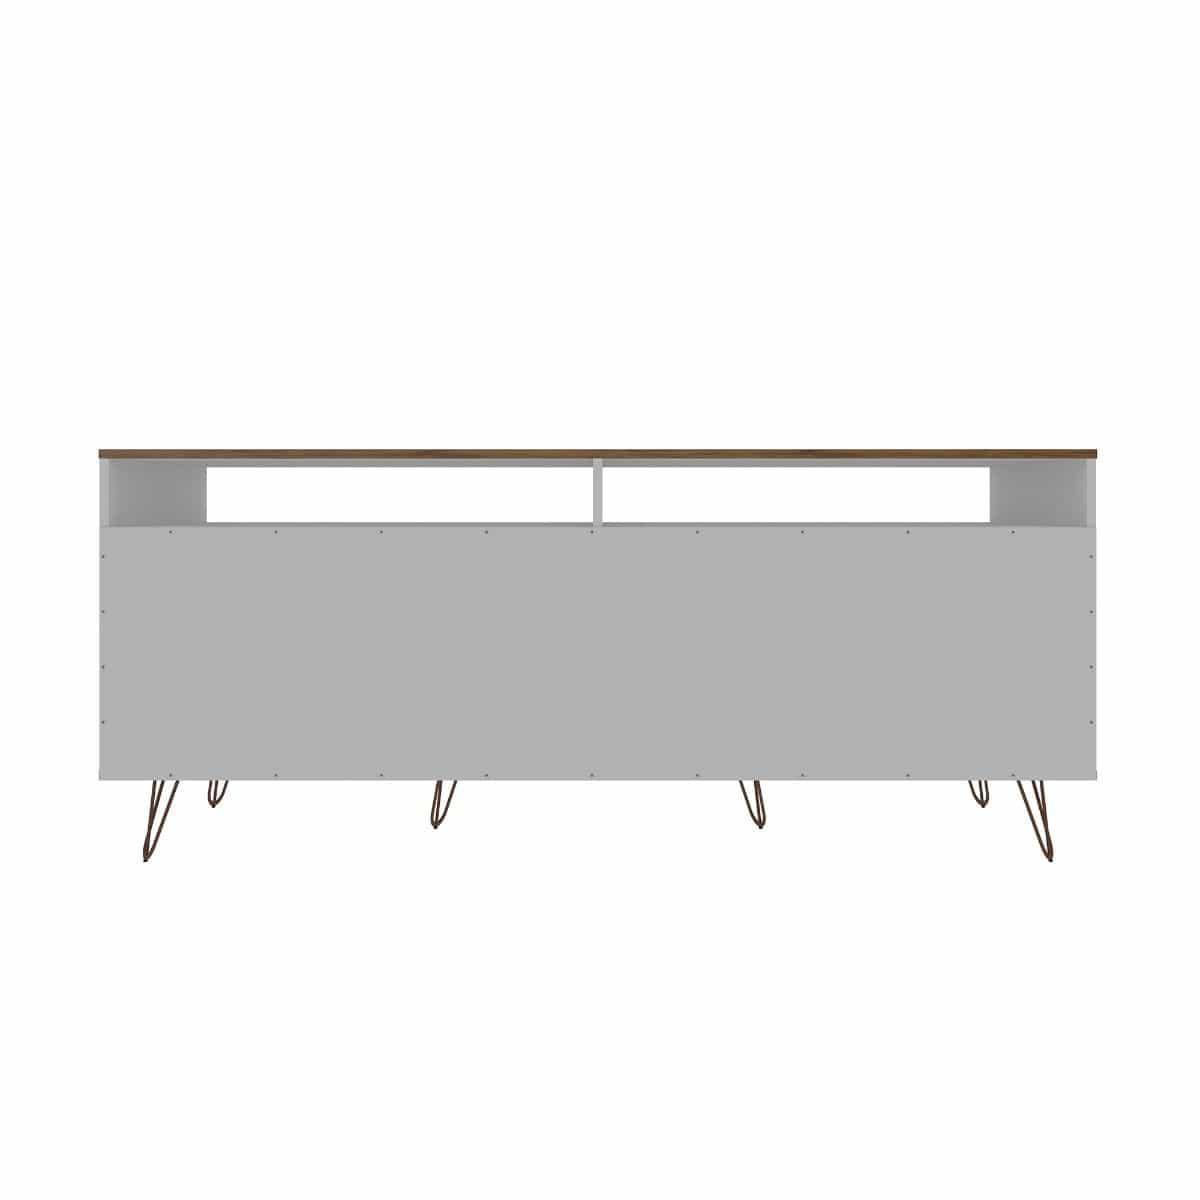 Manhattan Comfort Rockefeller 62.99 TV Stand with Metal Legs and 2 Drawers - Bedroom Depot USA